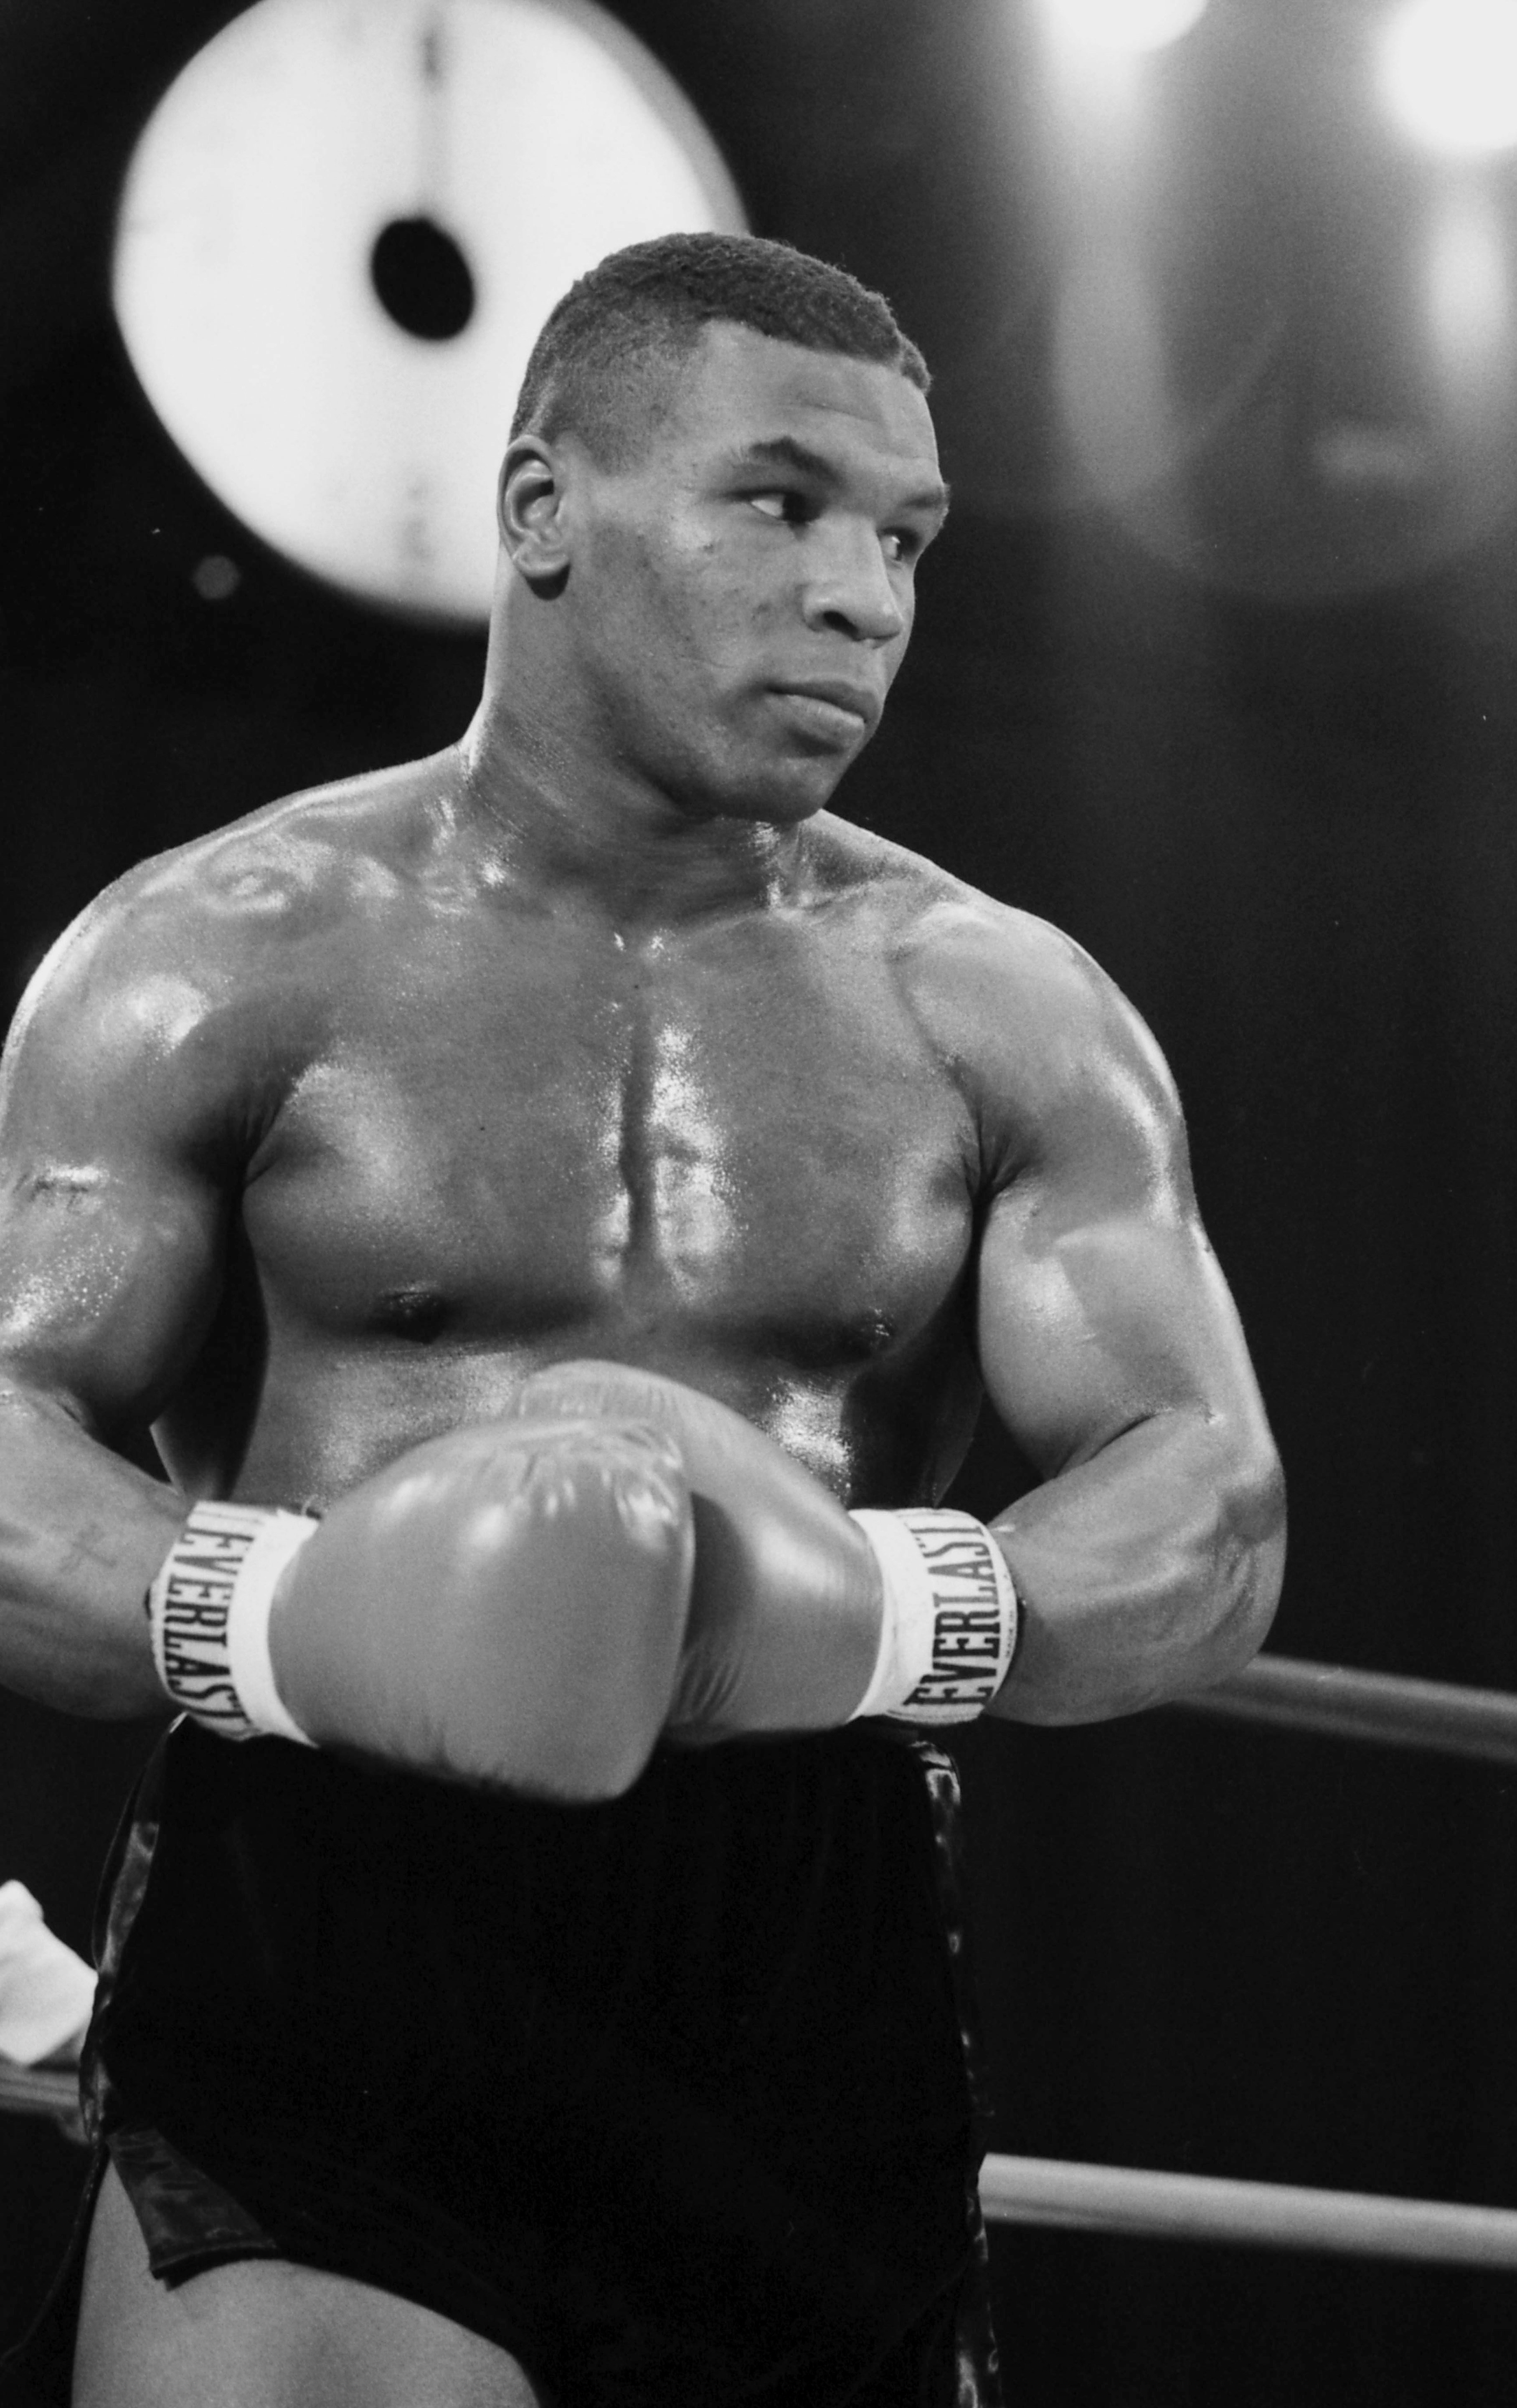 Mike Tyson in the ring against Sammy Scaff at the Felt Forum in New York, where Tyson secured victory with a TKO in the first round, on December 6, 1985 | Source: Getty Images